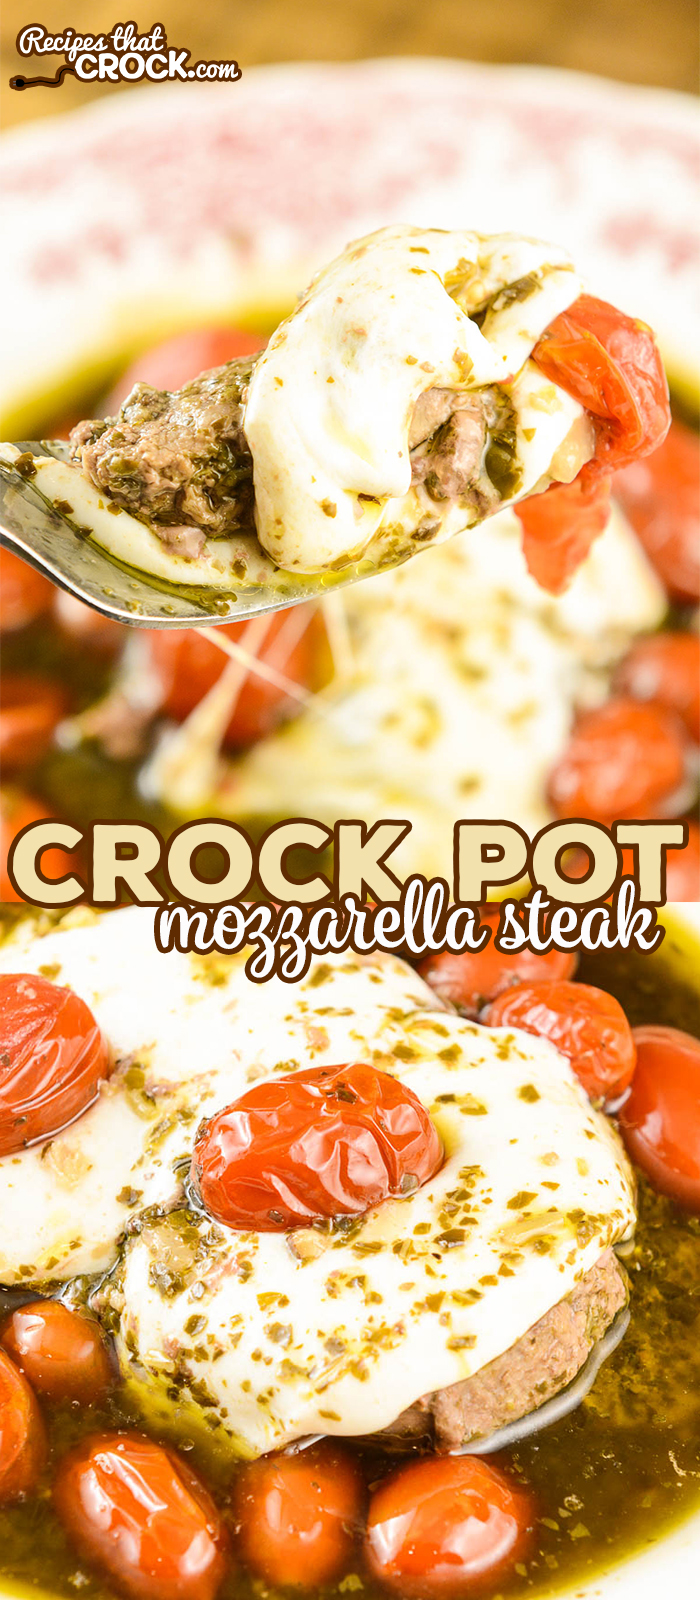 Are you looking for round steak crock pot recipes? Our Crock Pot Mozzarella Steak is an easy way to make a delicious low carb family dinner that even carb lovers enjoy!